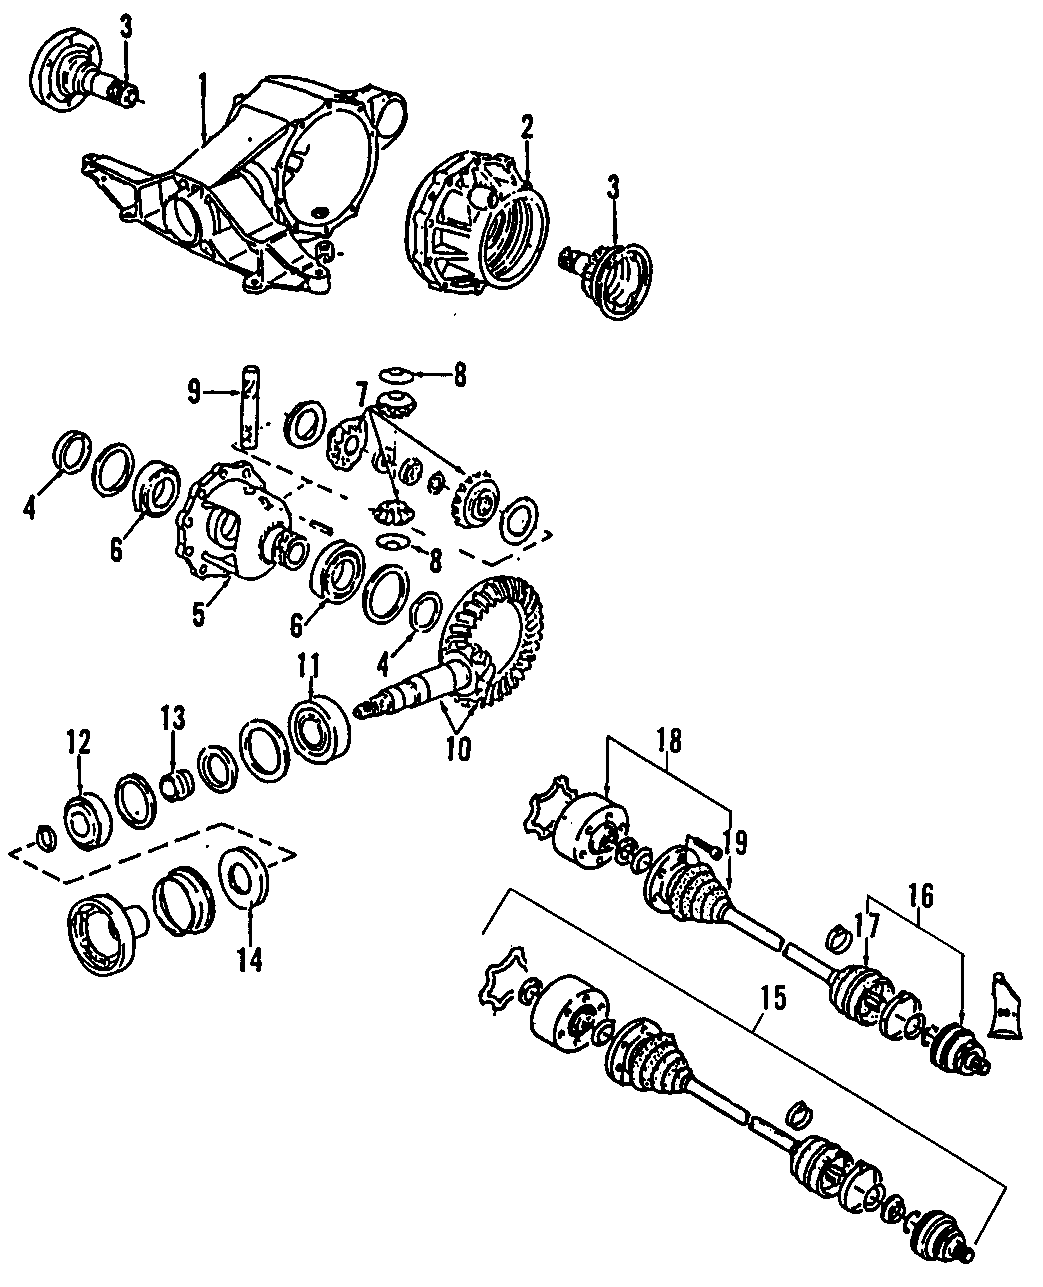 3DRIVE AXLES. REAR AXLE. AXLE SHAFTS & JOINTS. DIFFERENTIAL. PROPELLER SHAFT.https://images.simplepart.com/images/parts/motor/fullsize/F207090.png